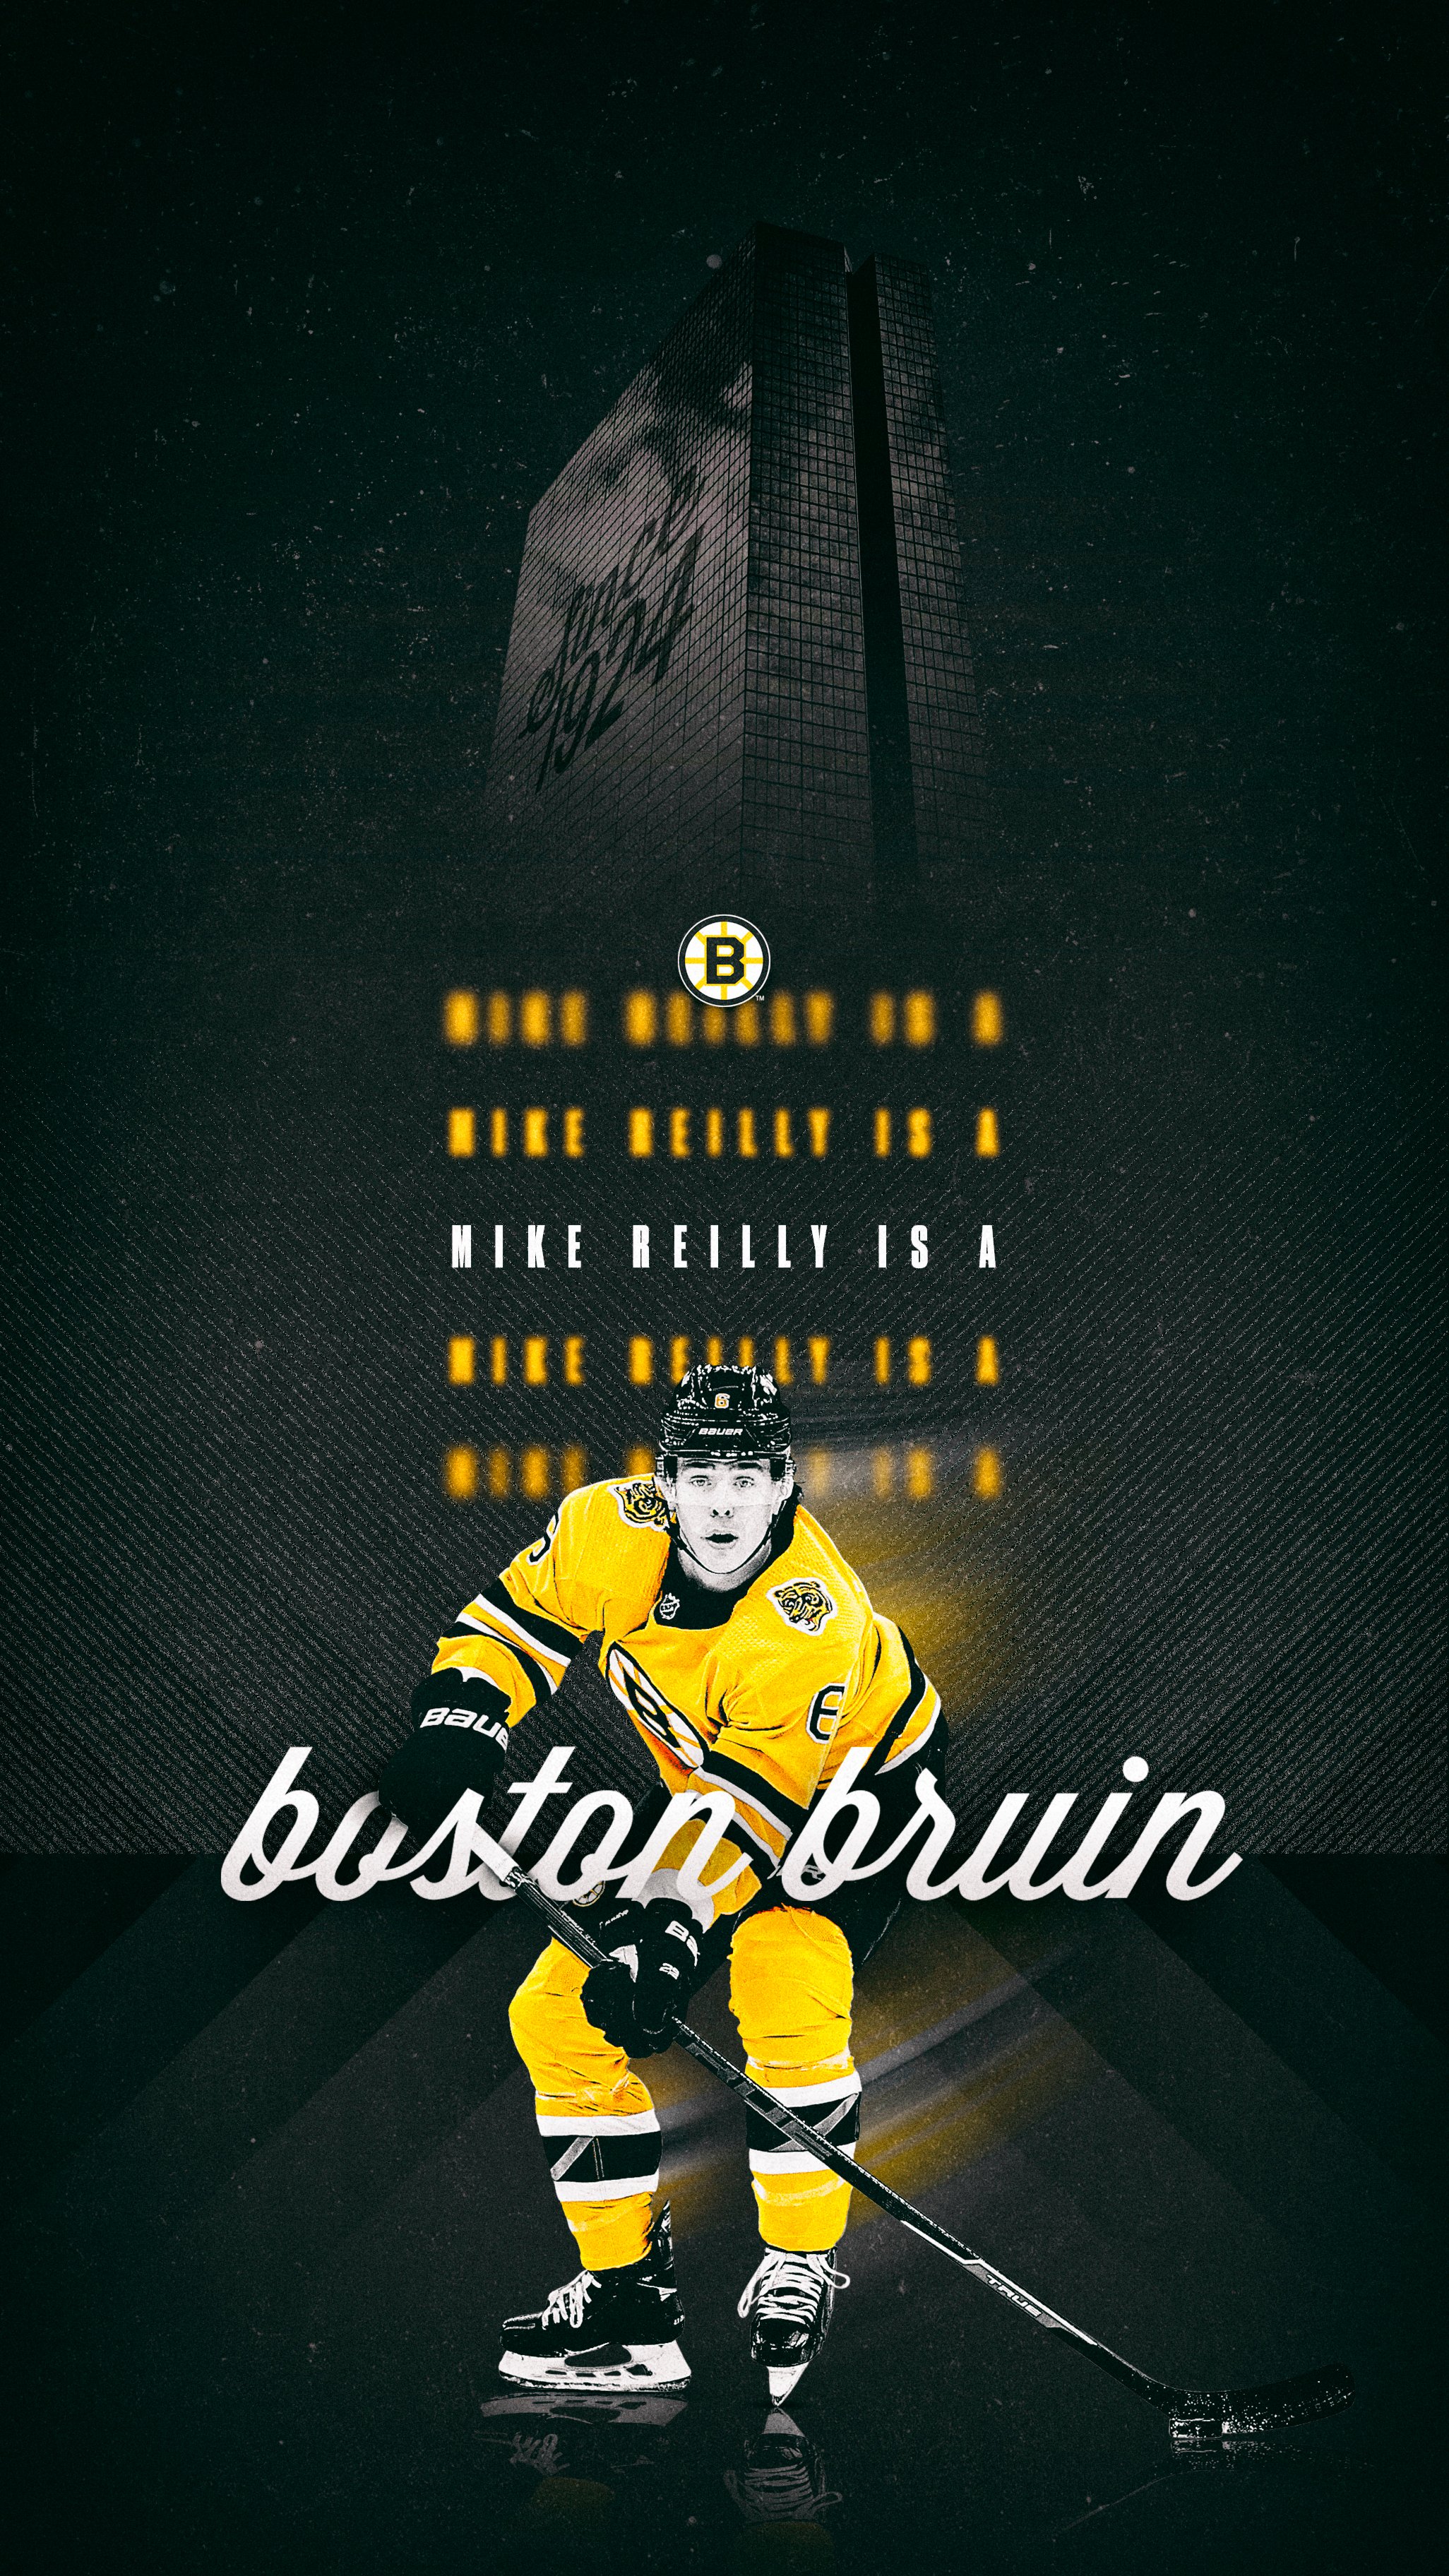 Boston Bruins - 6⃣3⃣ here to grace those backgrounds.